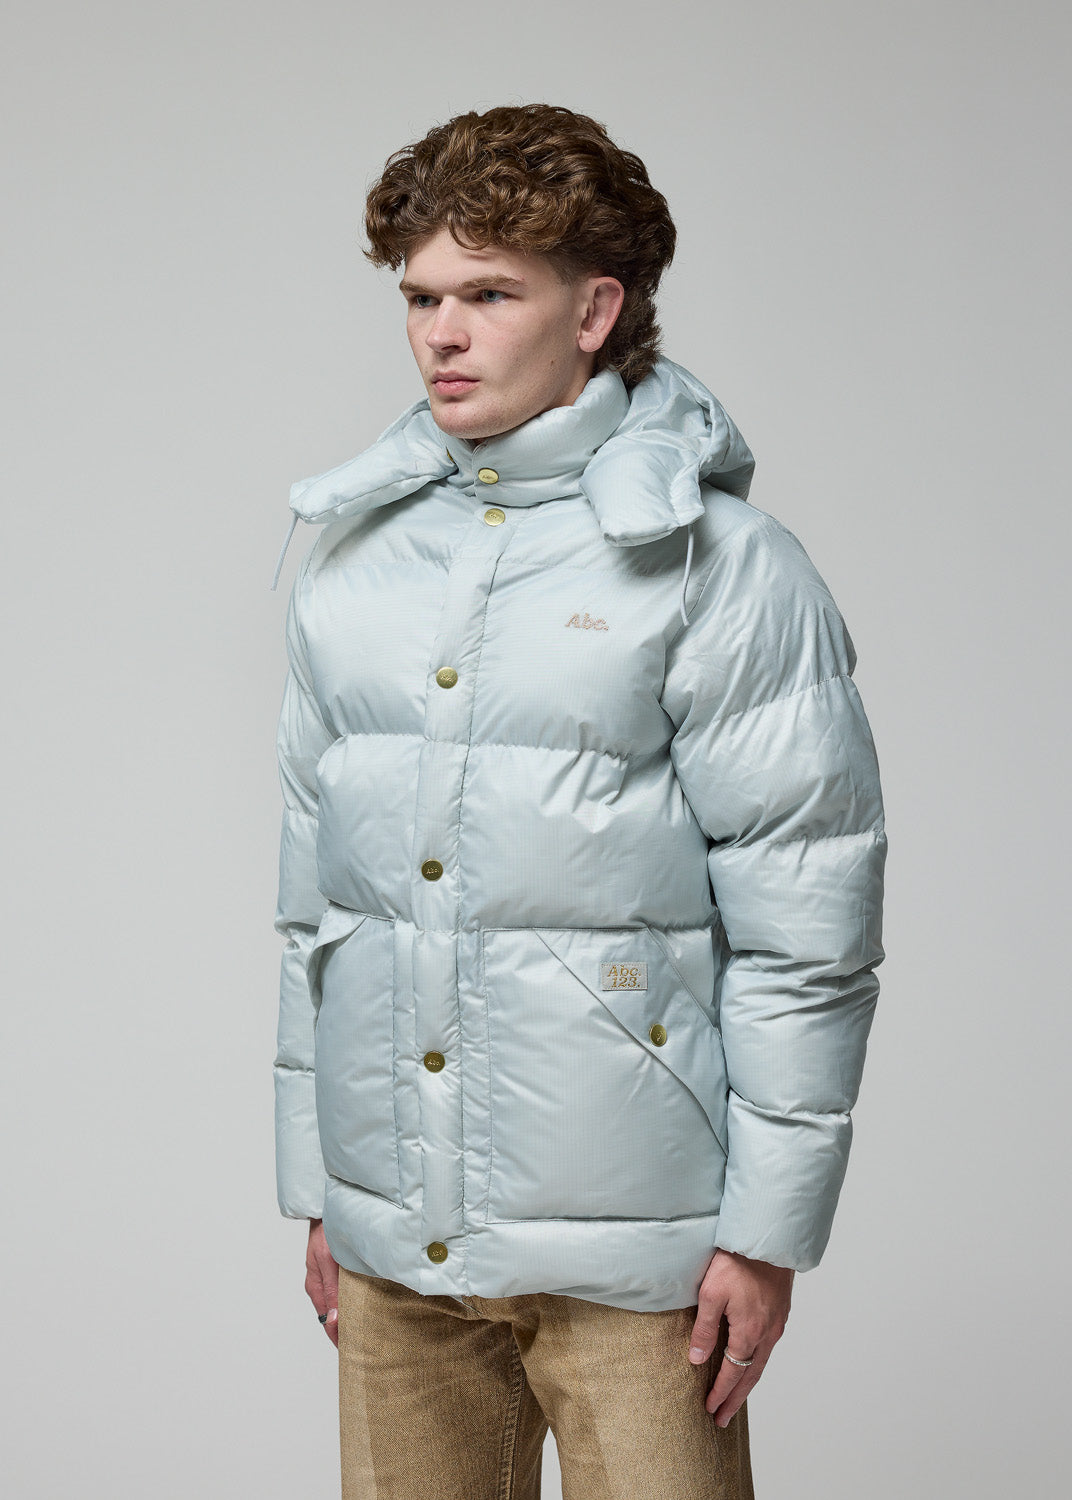 Abc. Clouded Ripstop Jacket – Advisory Board Crystals